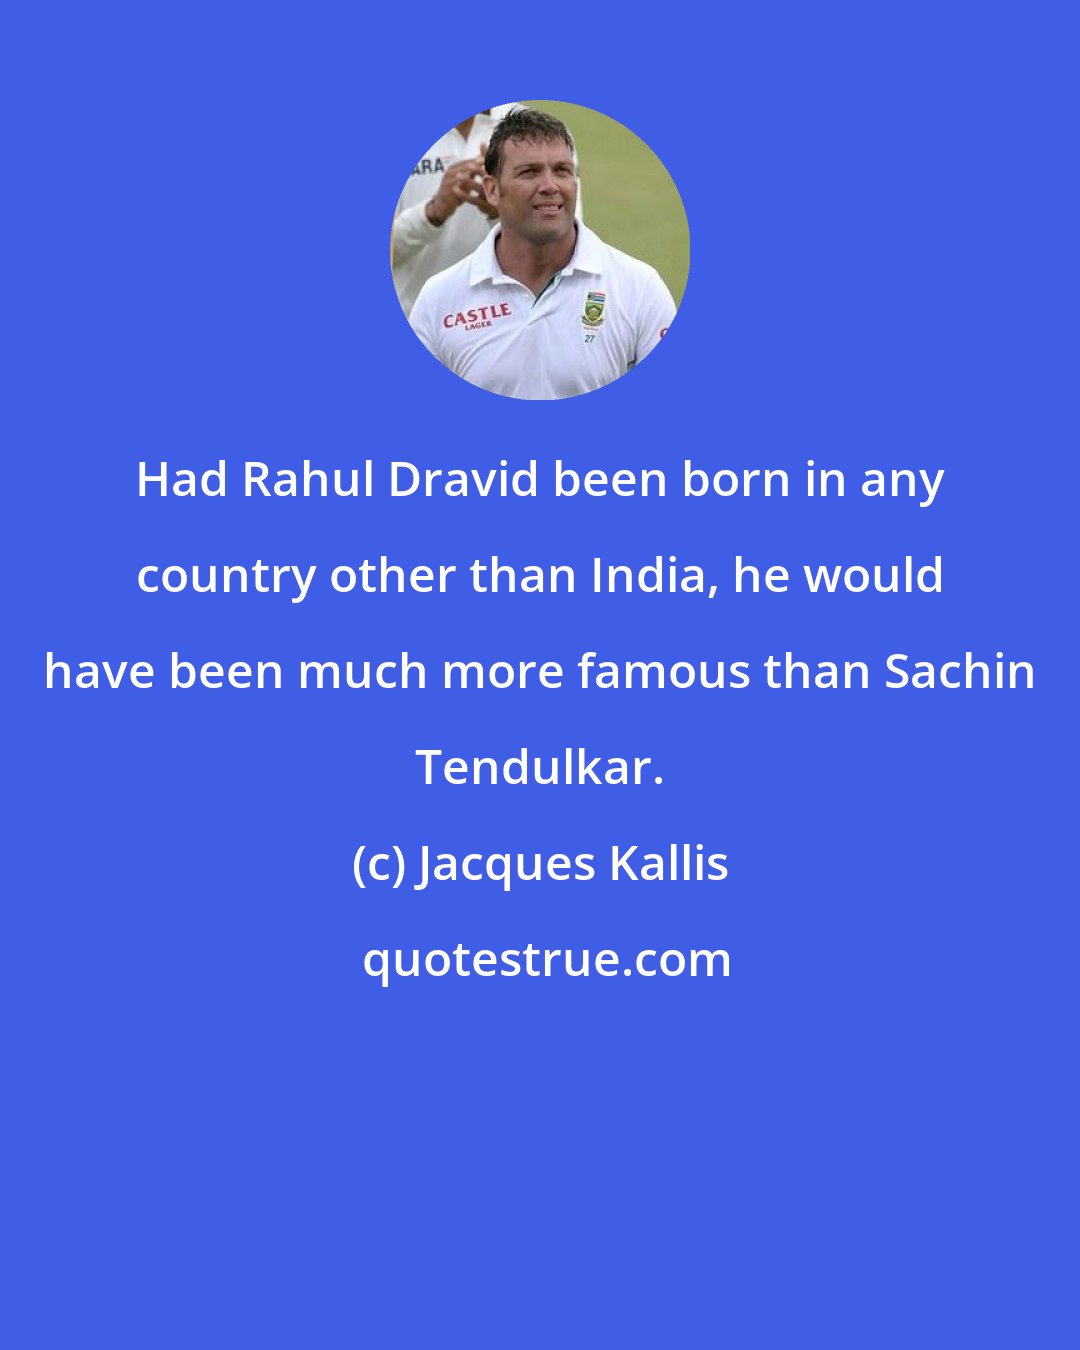 Jacques Kallis: Had Rahul Dravid been born in any country other than India, he would have been much more famous than Sachin Tendulkar.